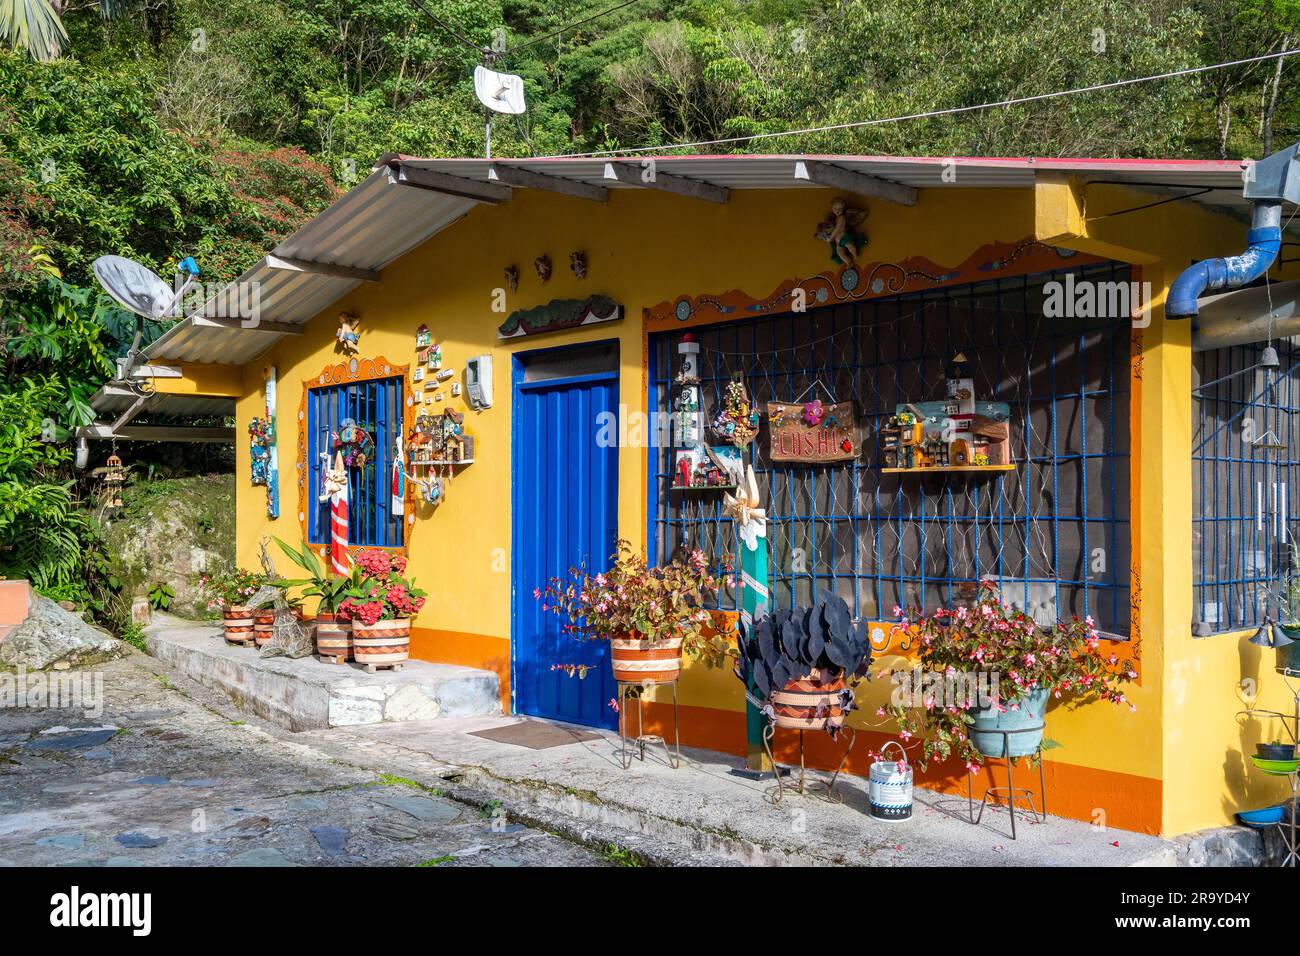 A house with colorful painting and decorations. Colombia, South America. Stock Photo